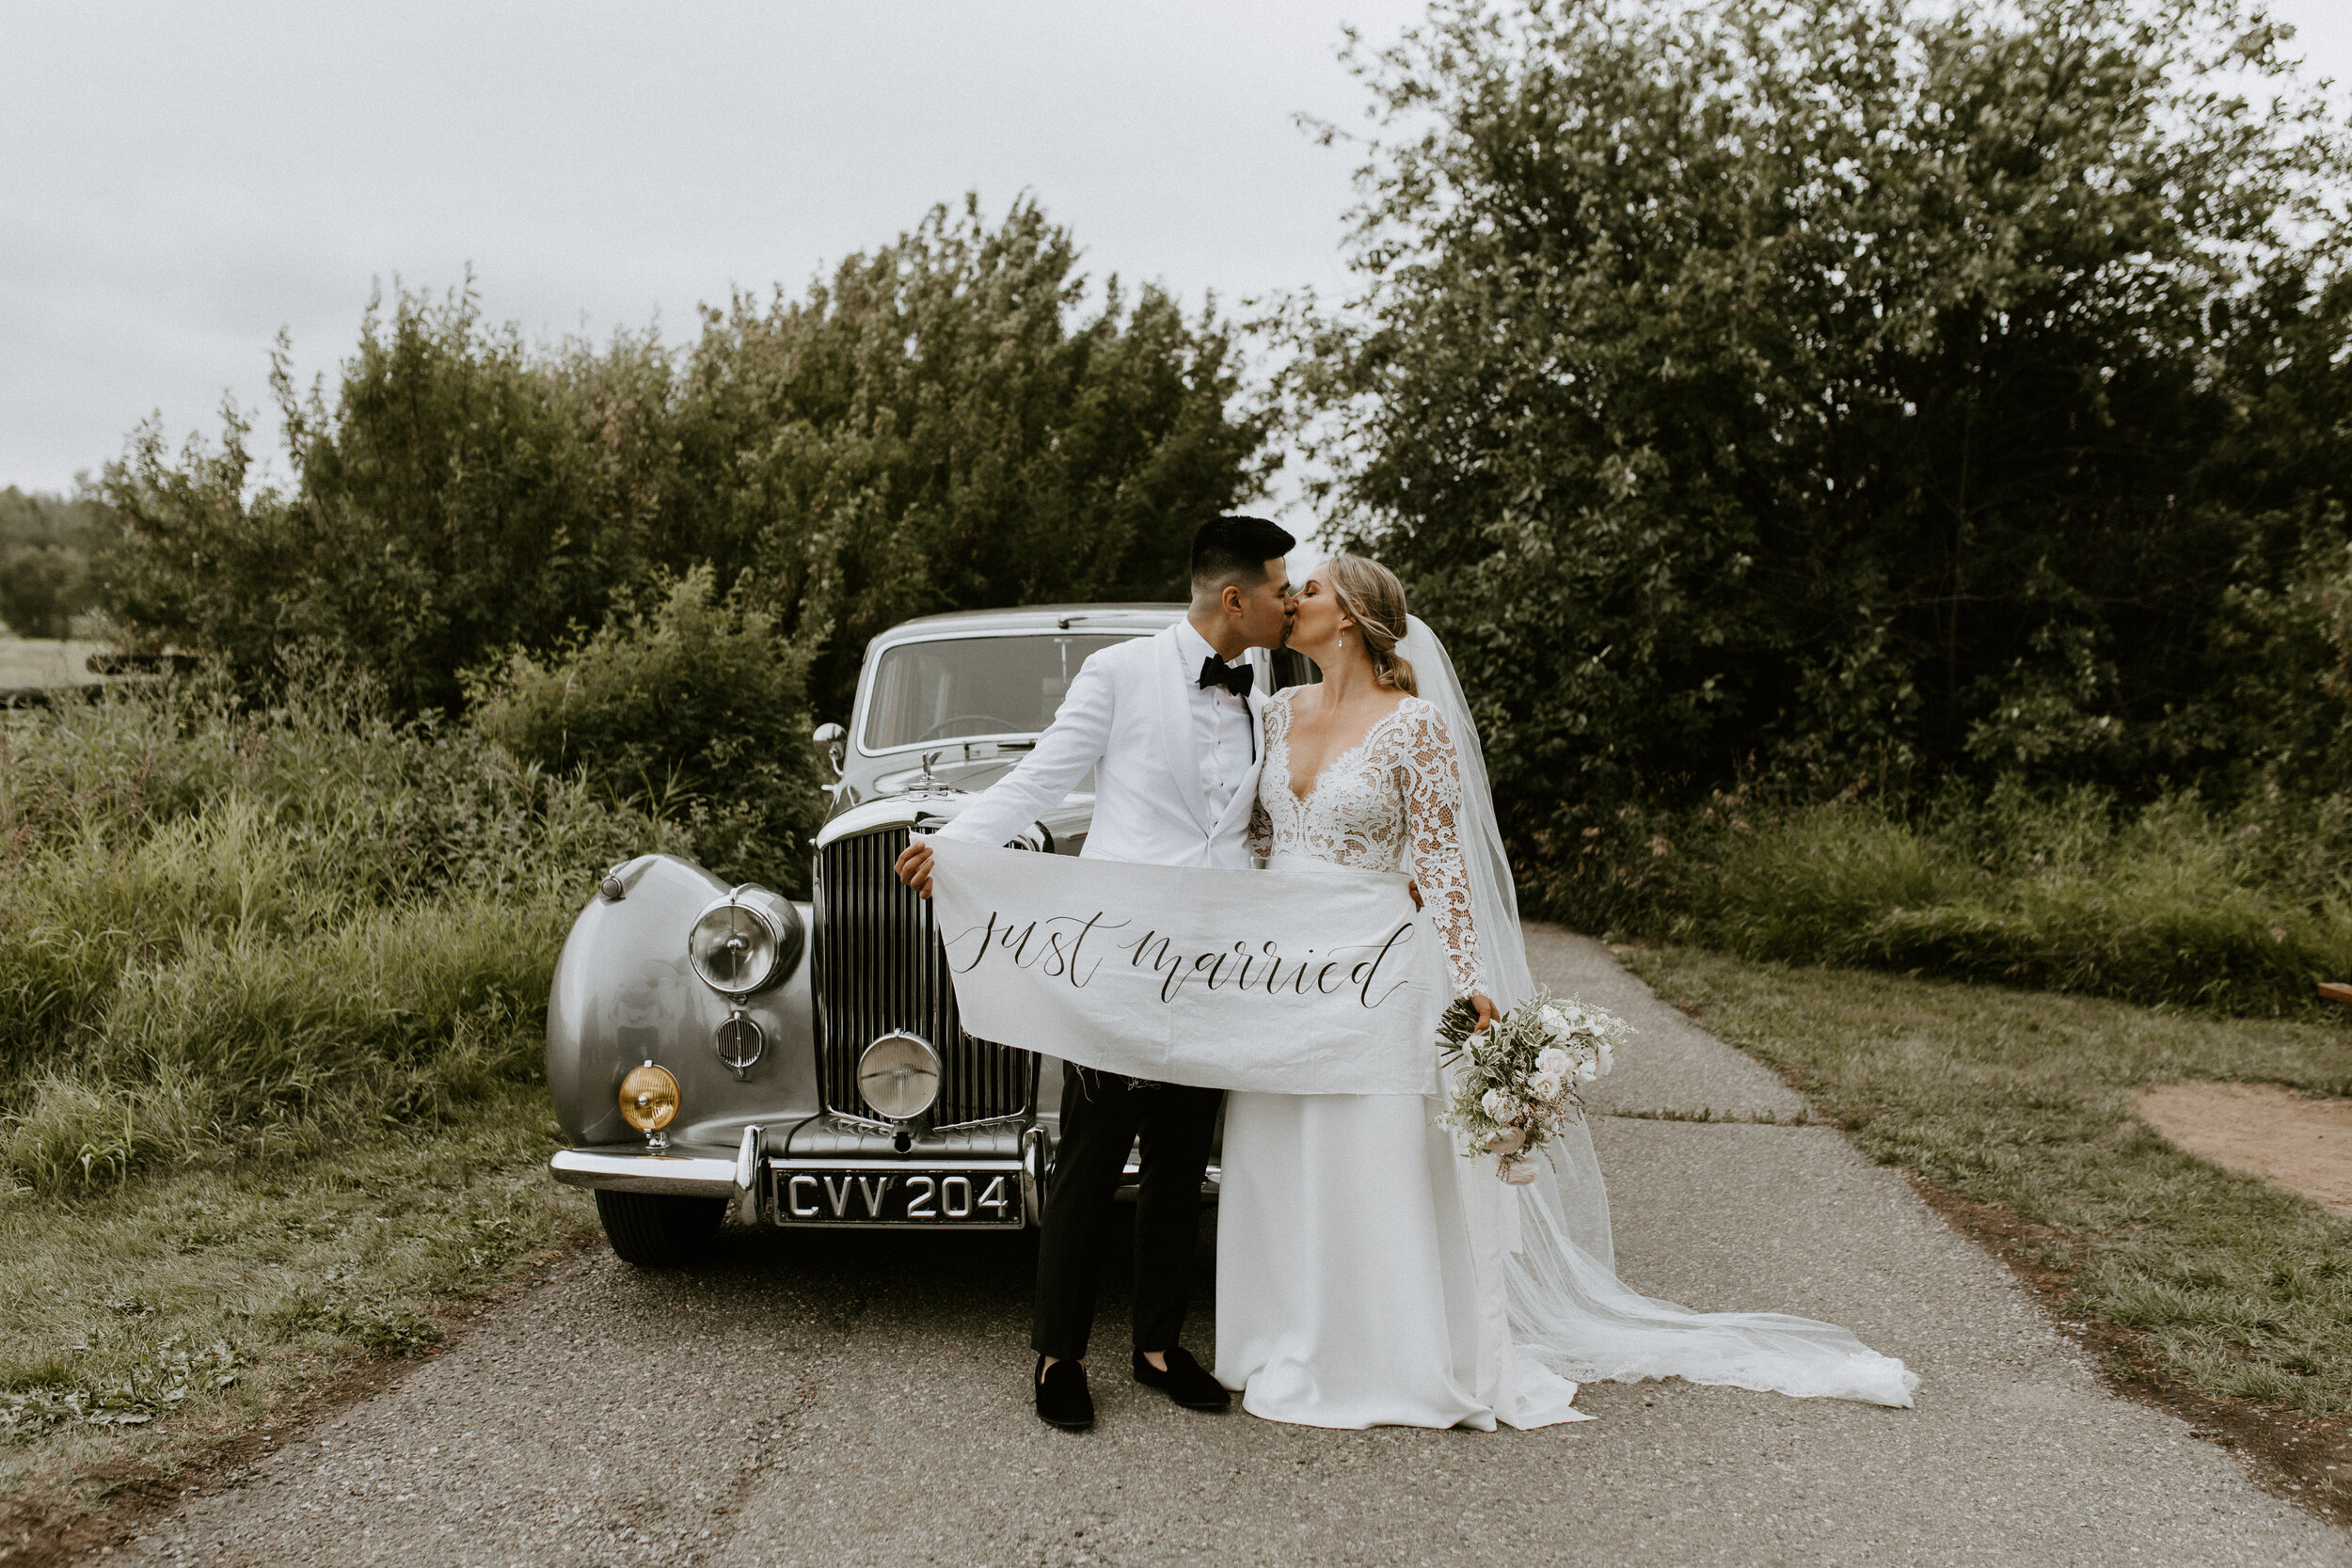 Bride and Groom - Wedding Style Inspiration - Just Married